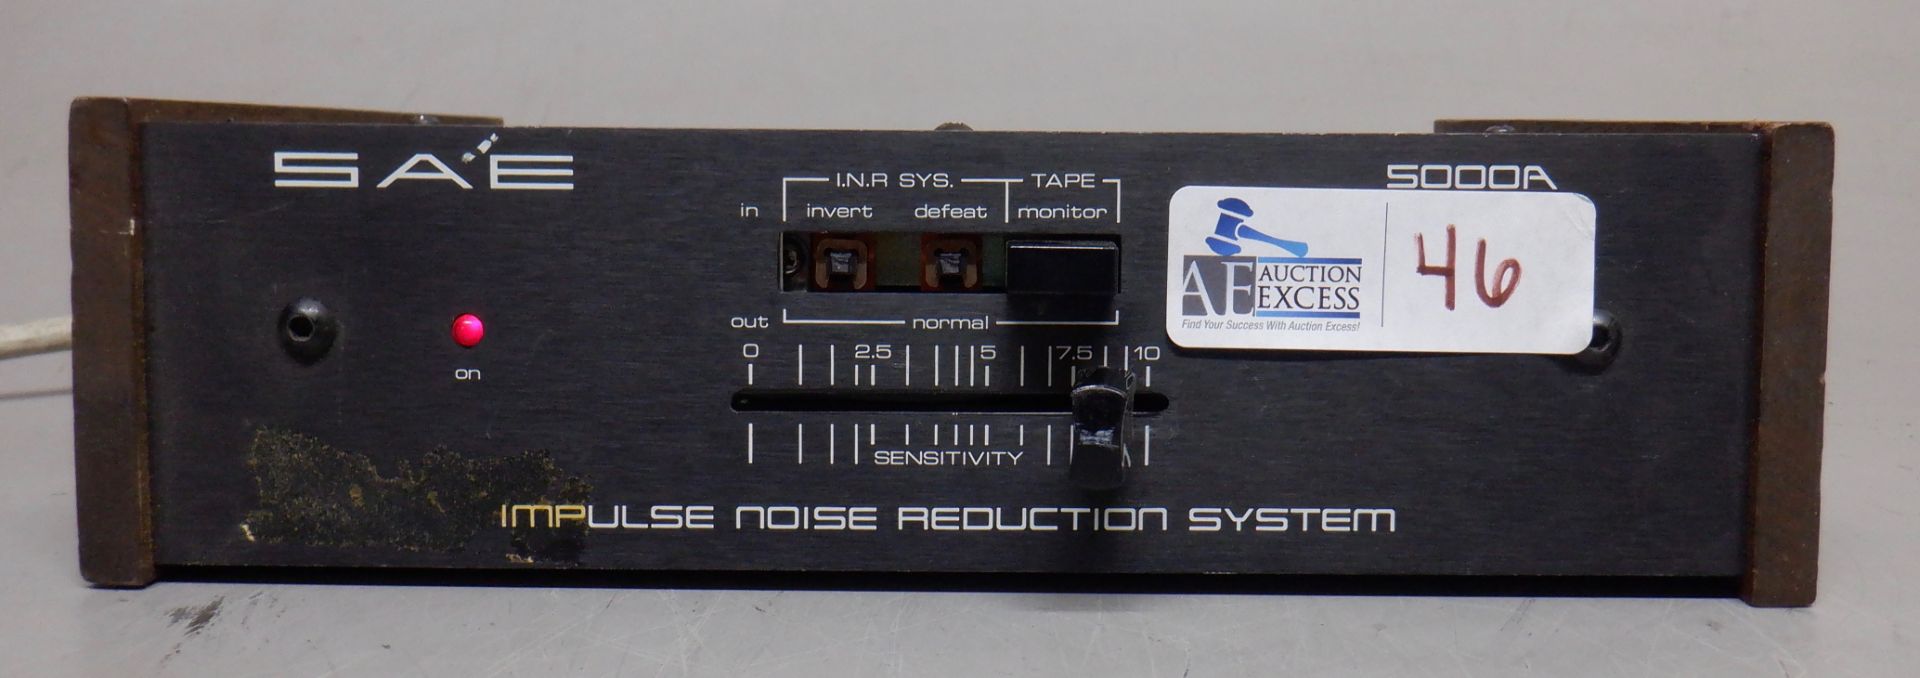 SAE 5000A IMPULSE NOISE REDUCTION SYSTEM